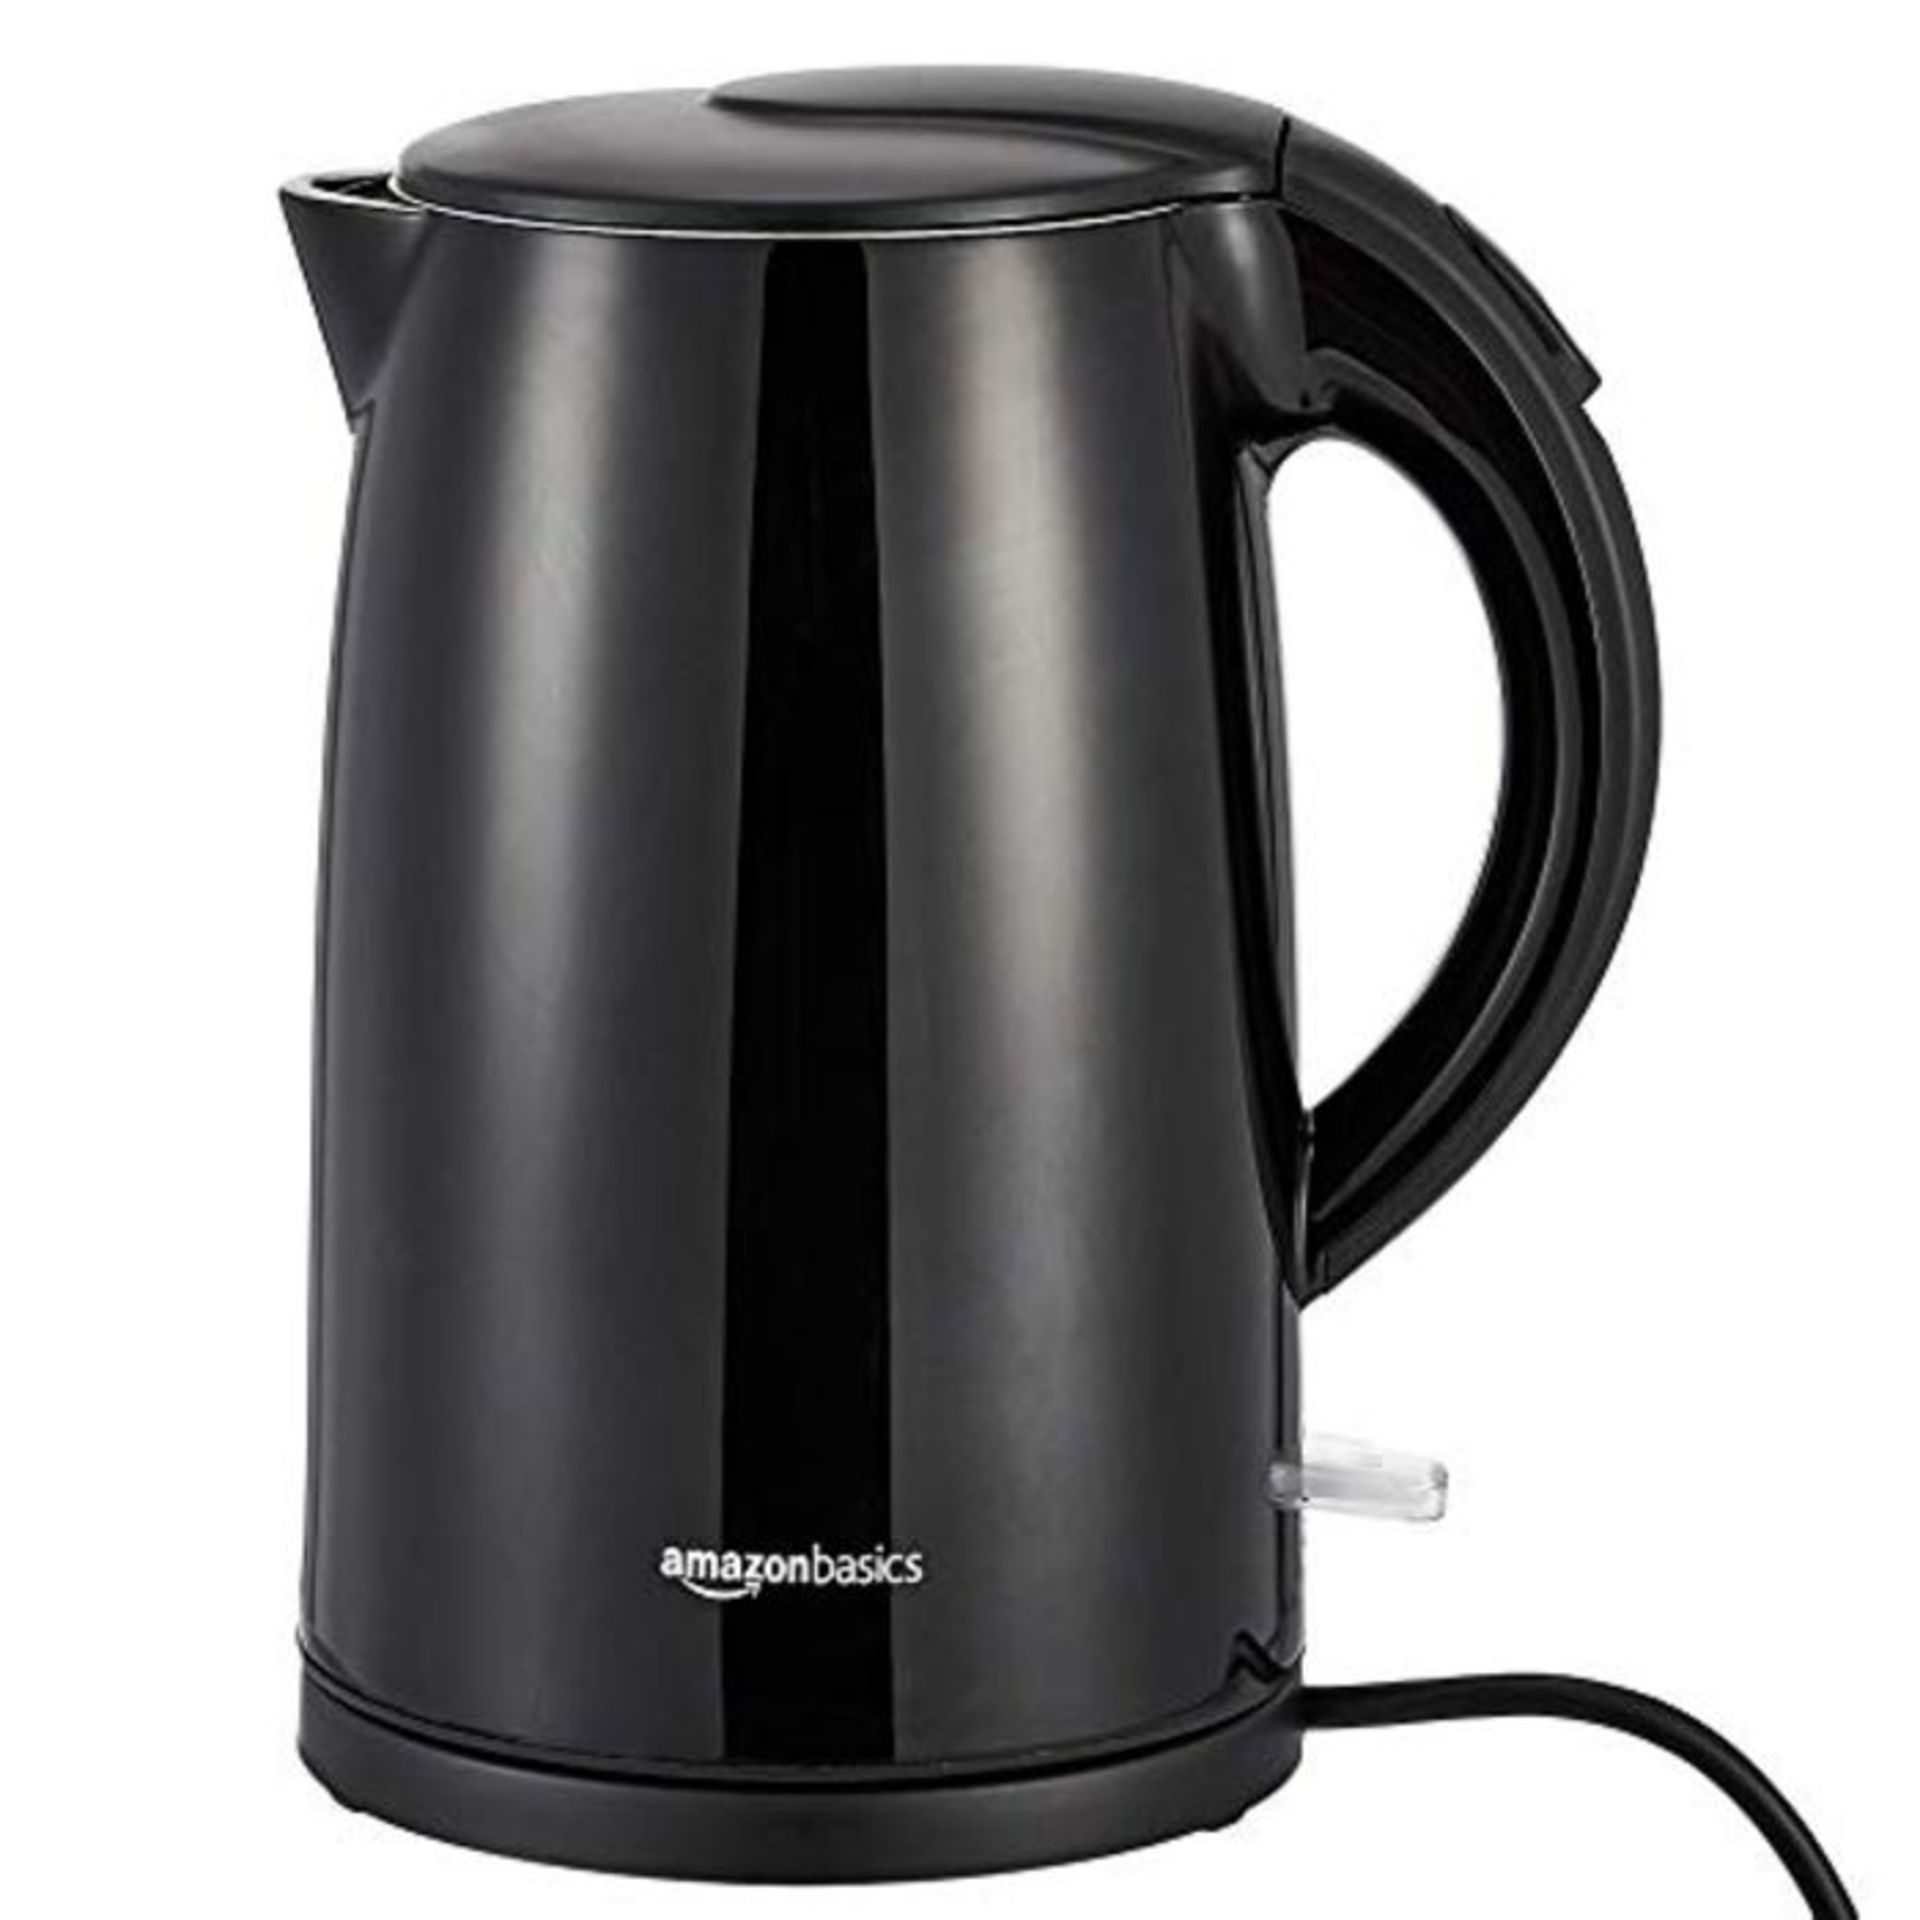 Amazon Basics - Double-walled stainless steel kettle - 1.7 litres